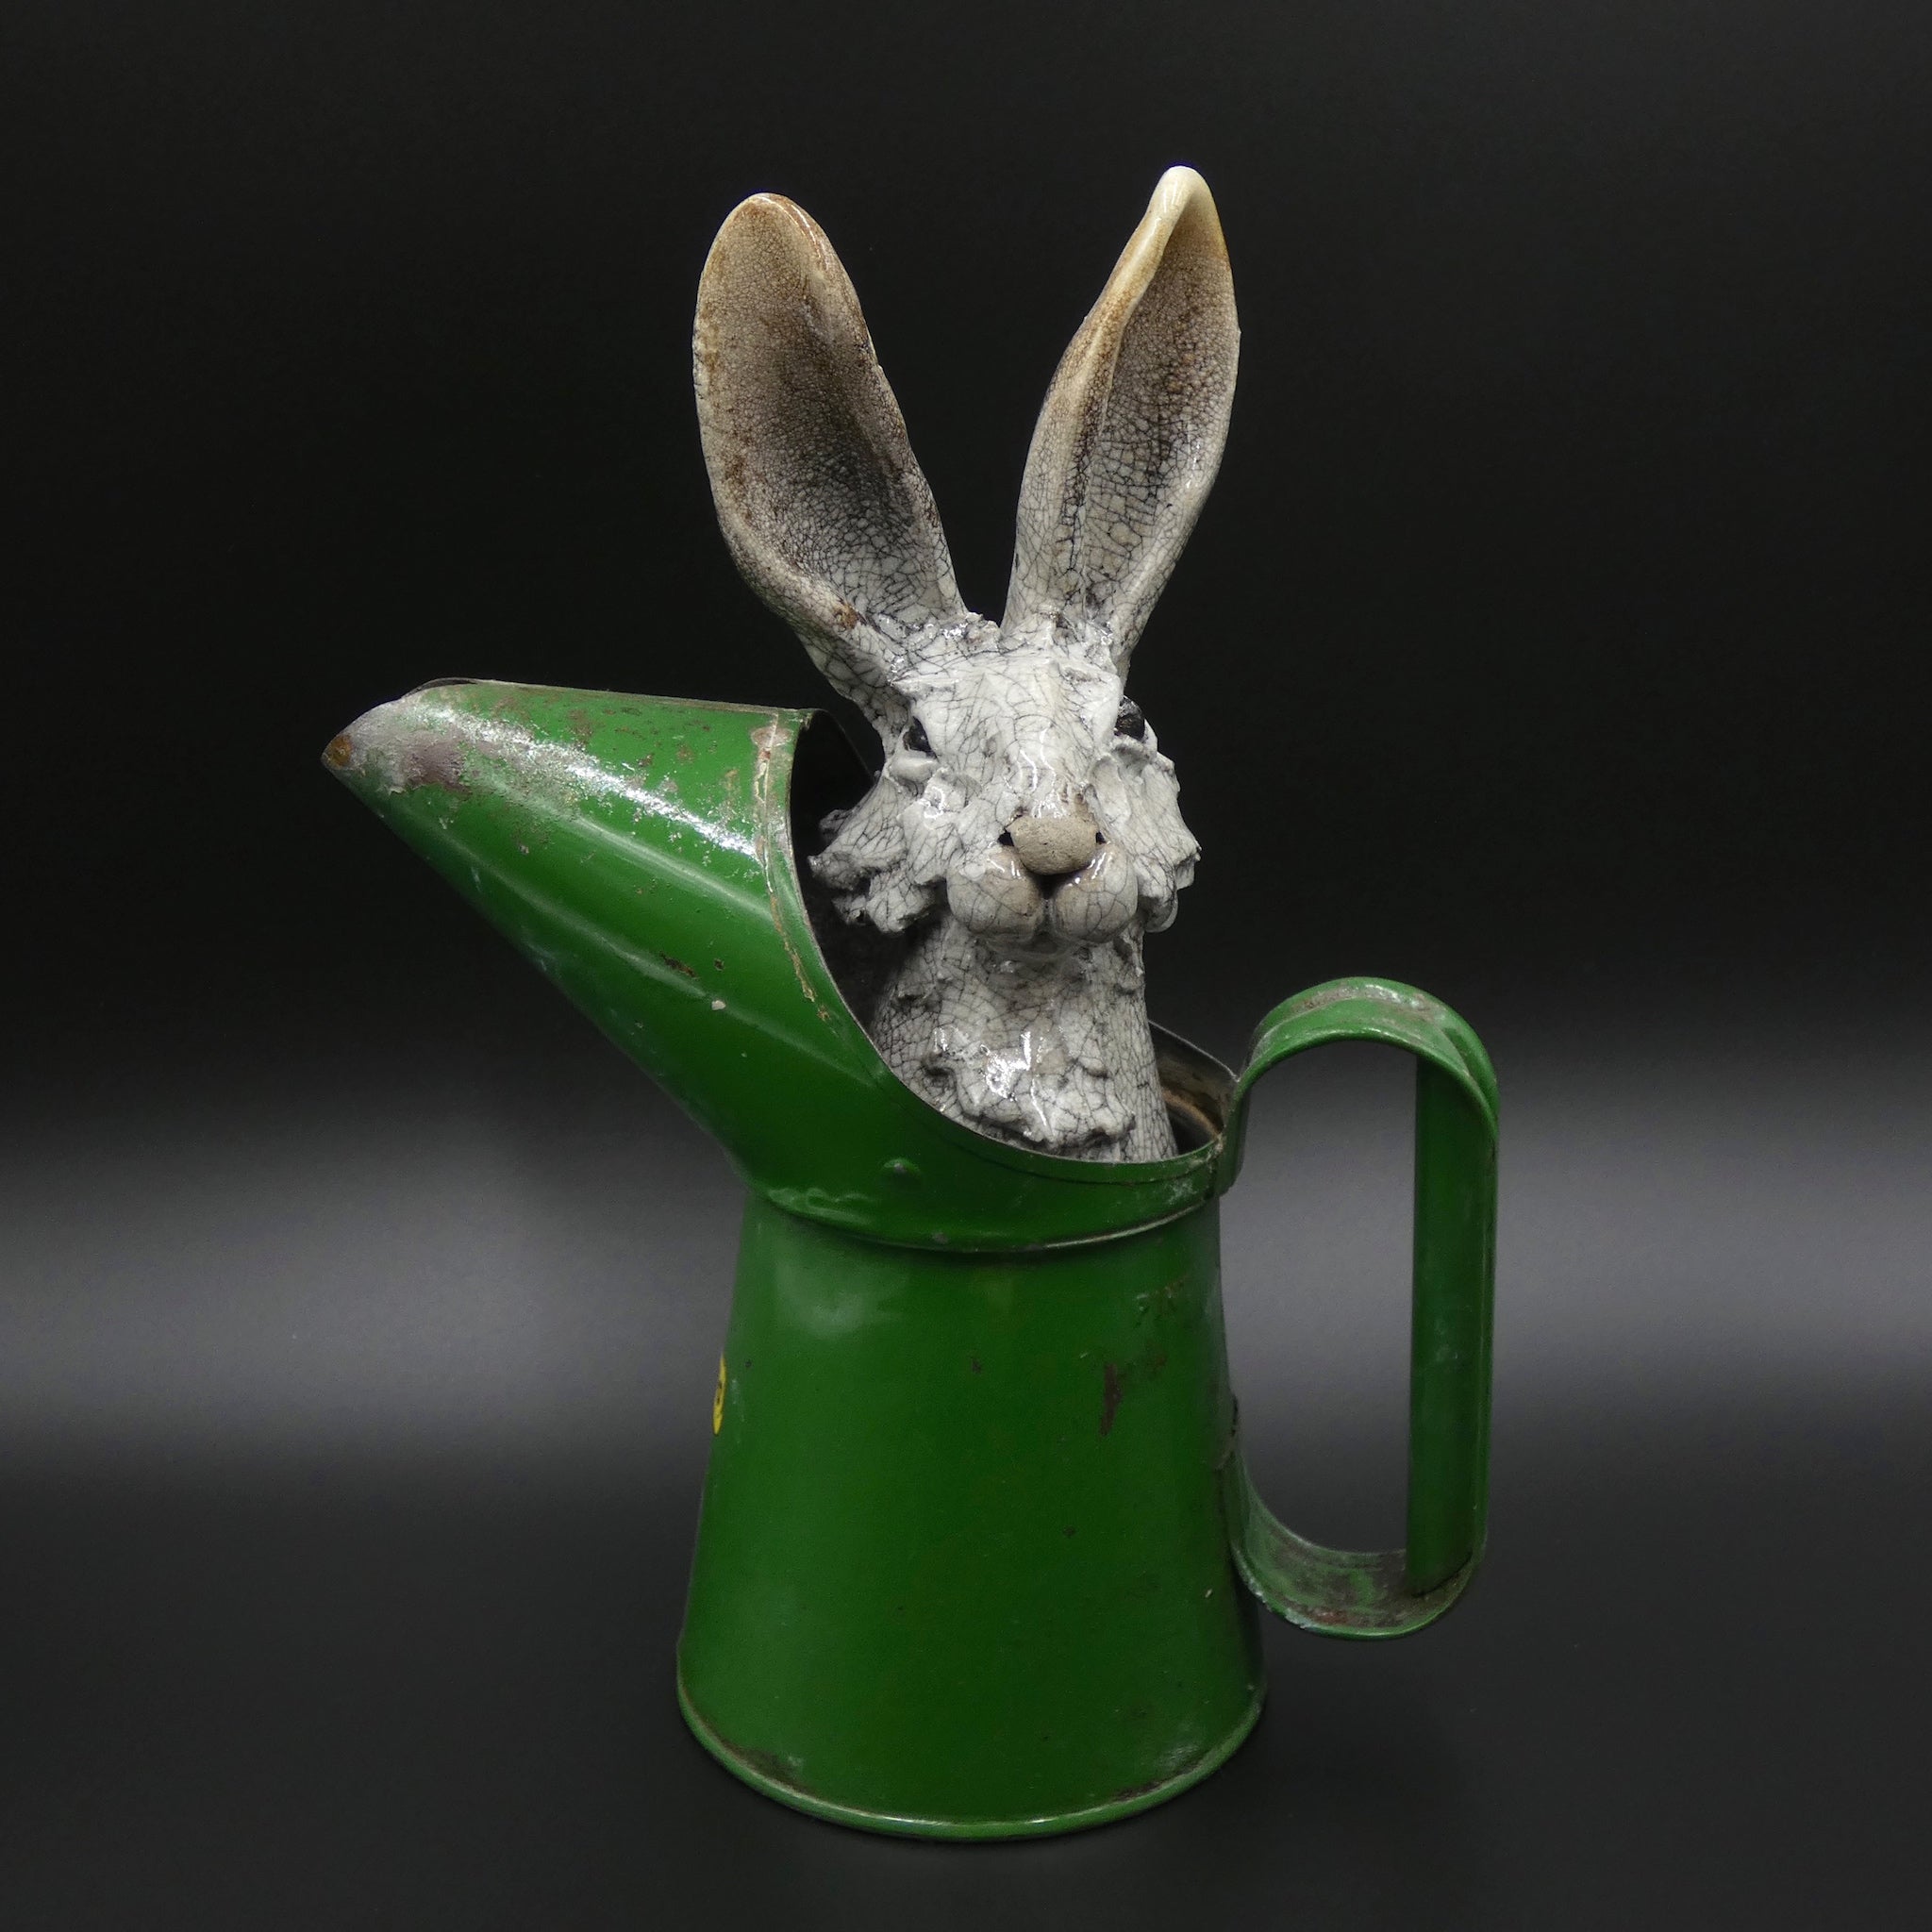 Sculpture of a hare hiding in an oil jug by artists Richard Ballantyne and Carol Read